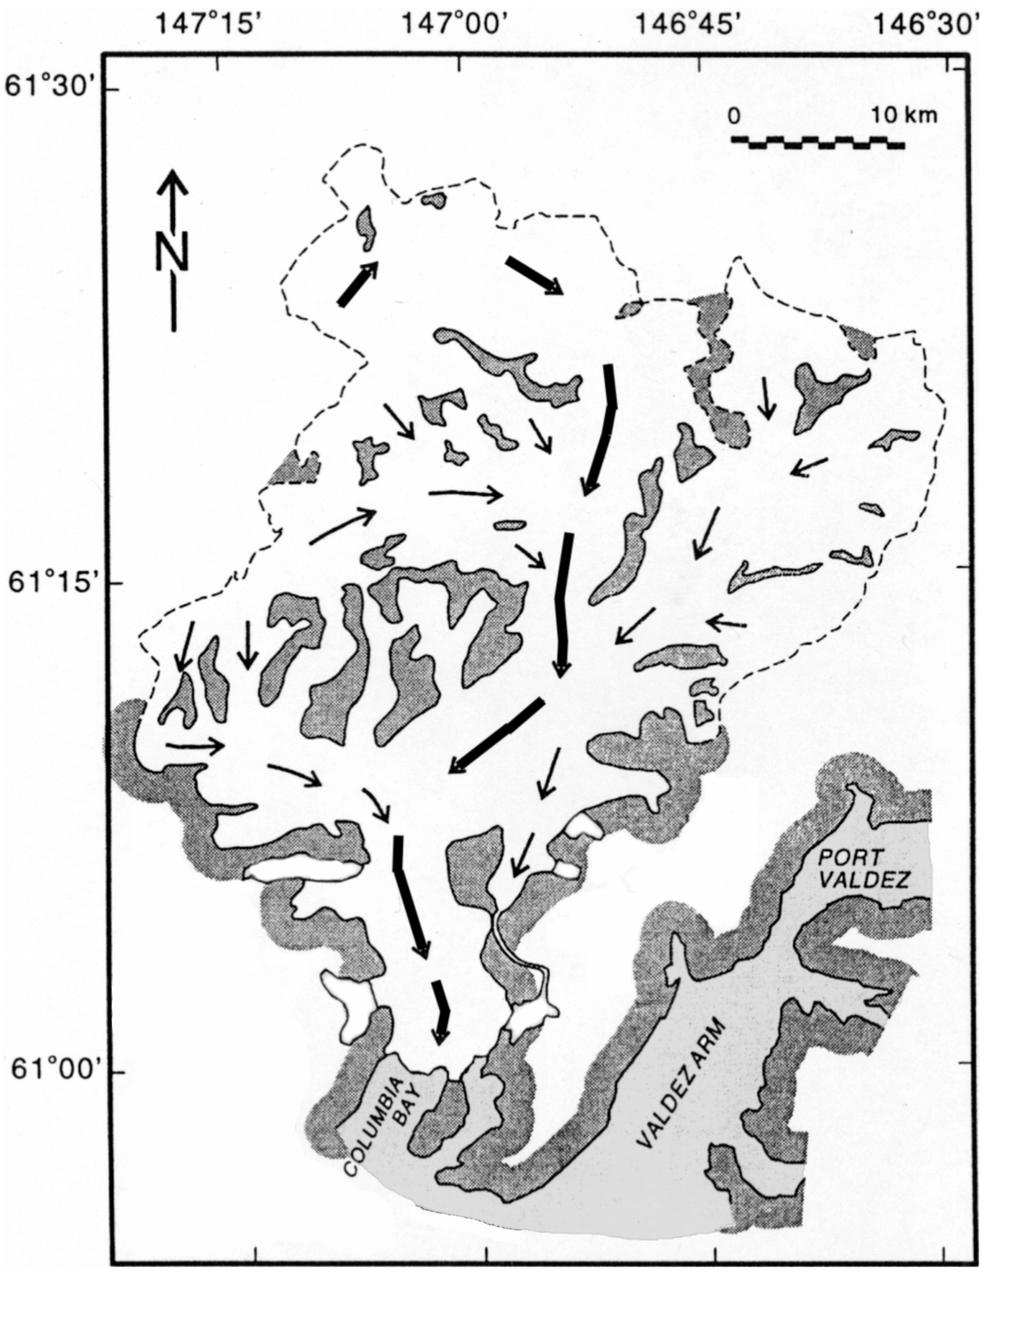 86 Controls on advance of tidewater glaciers Figure 5.3: Map of Columbia Glacier. Dark shading represents exposed rock and light shading indicates open water.